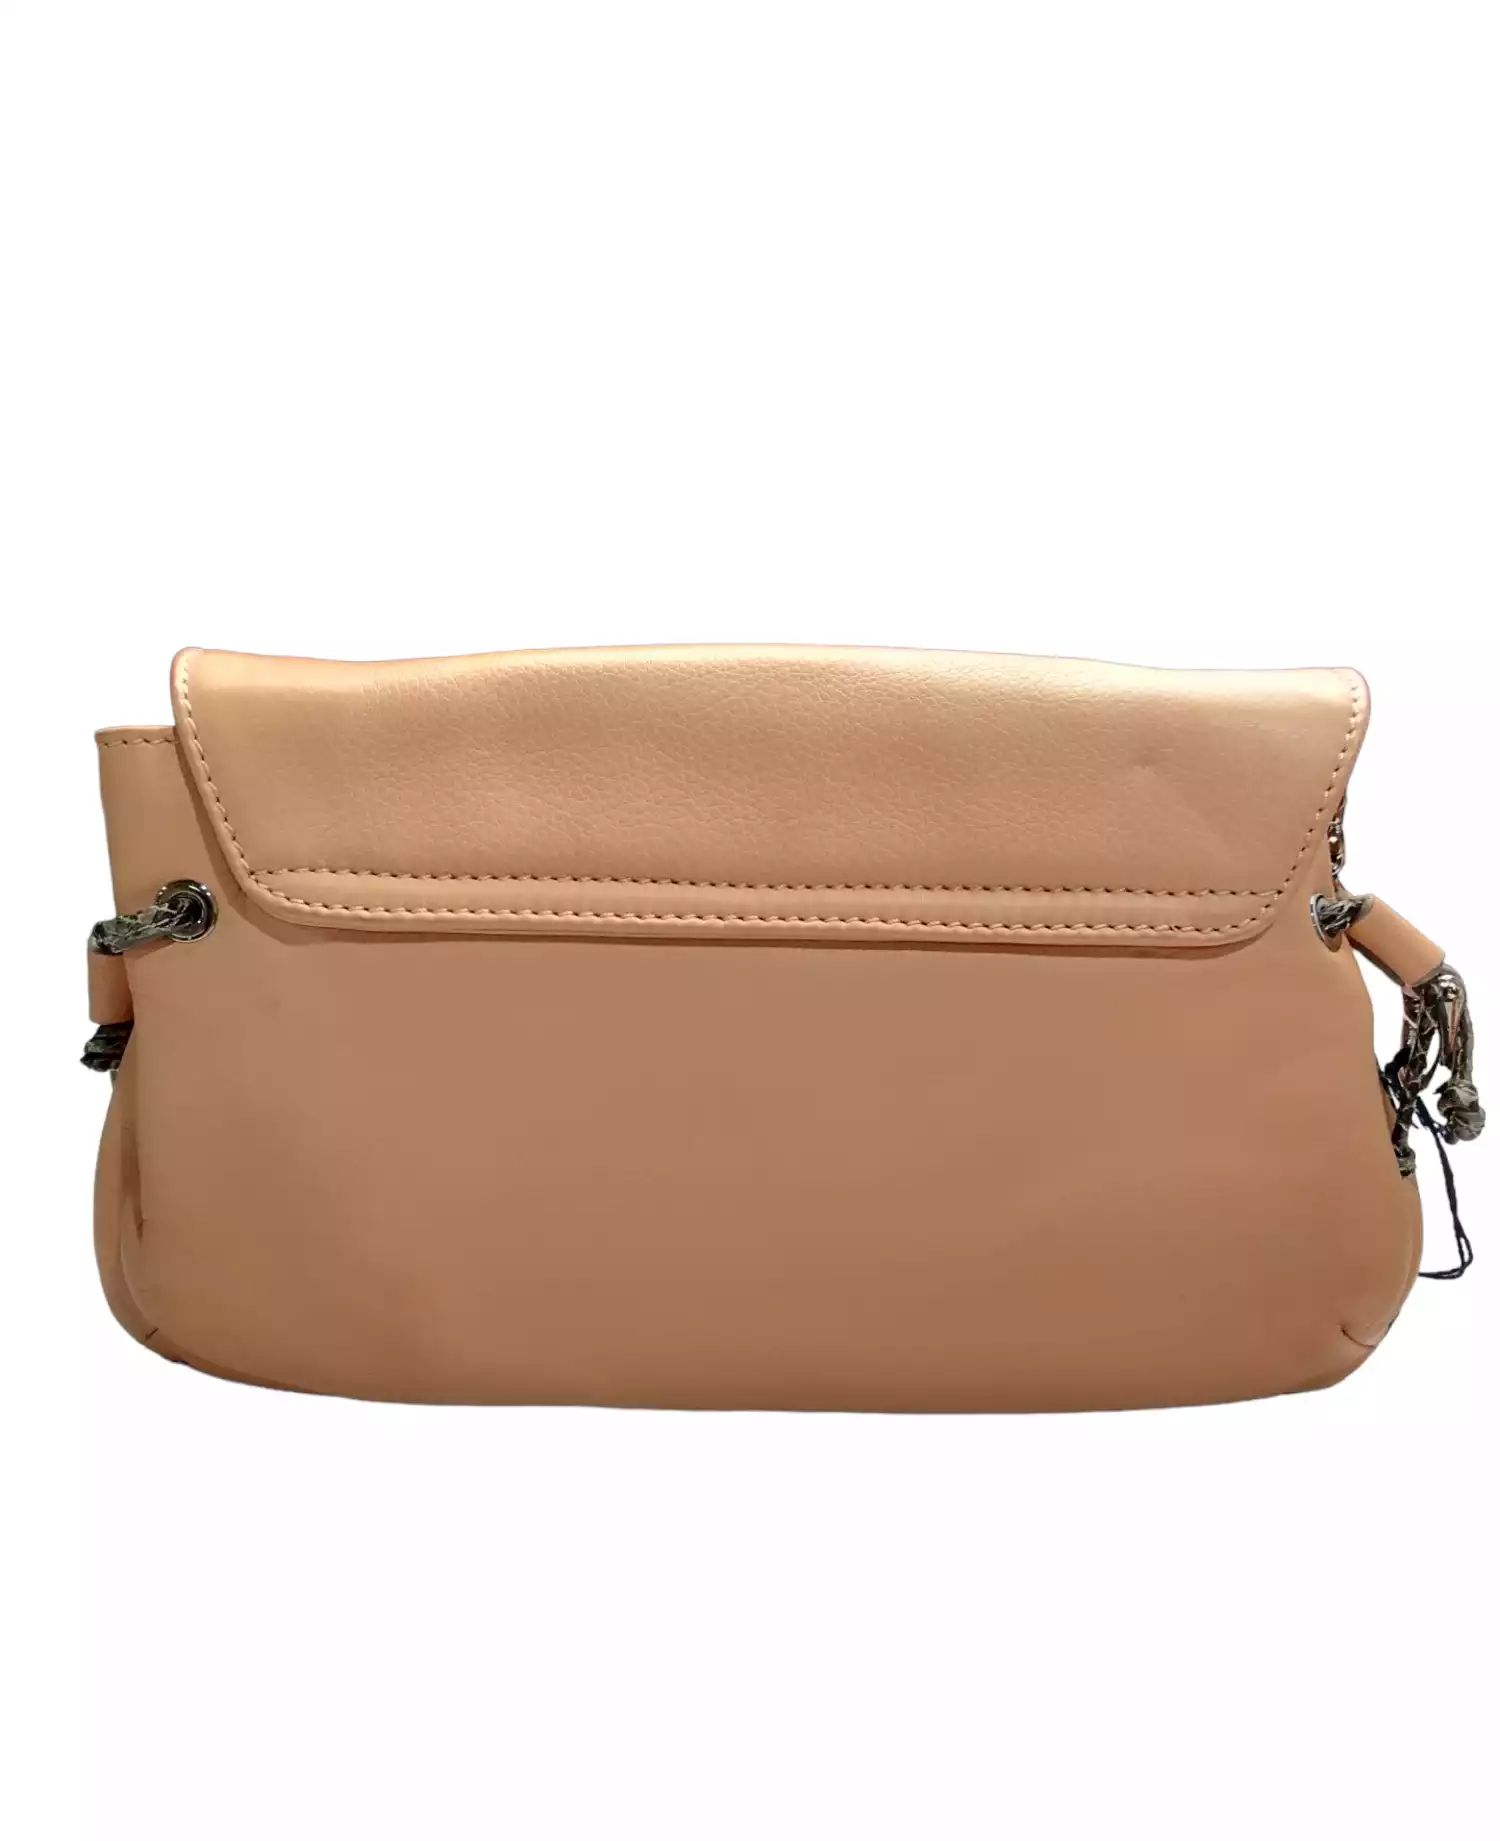 Sling Bag by Aigner